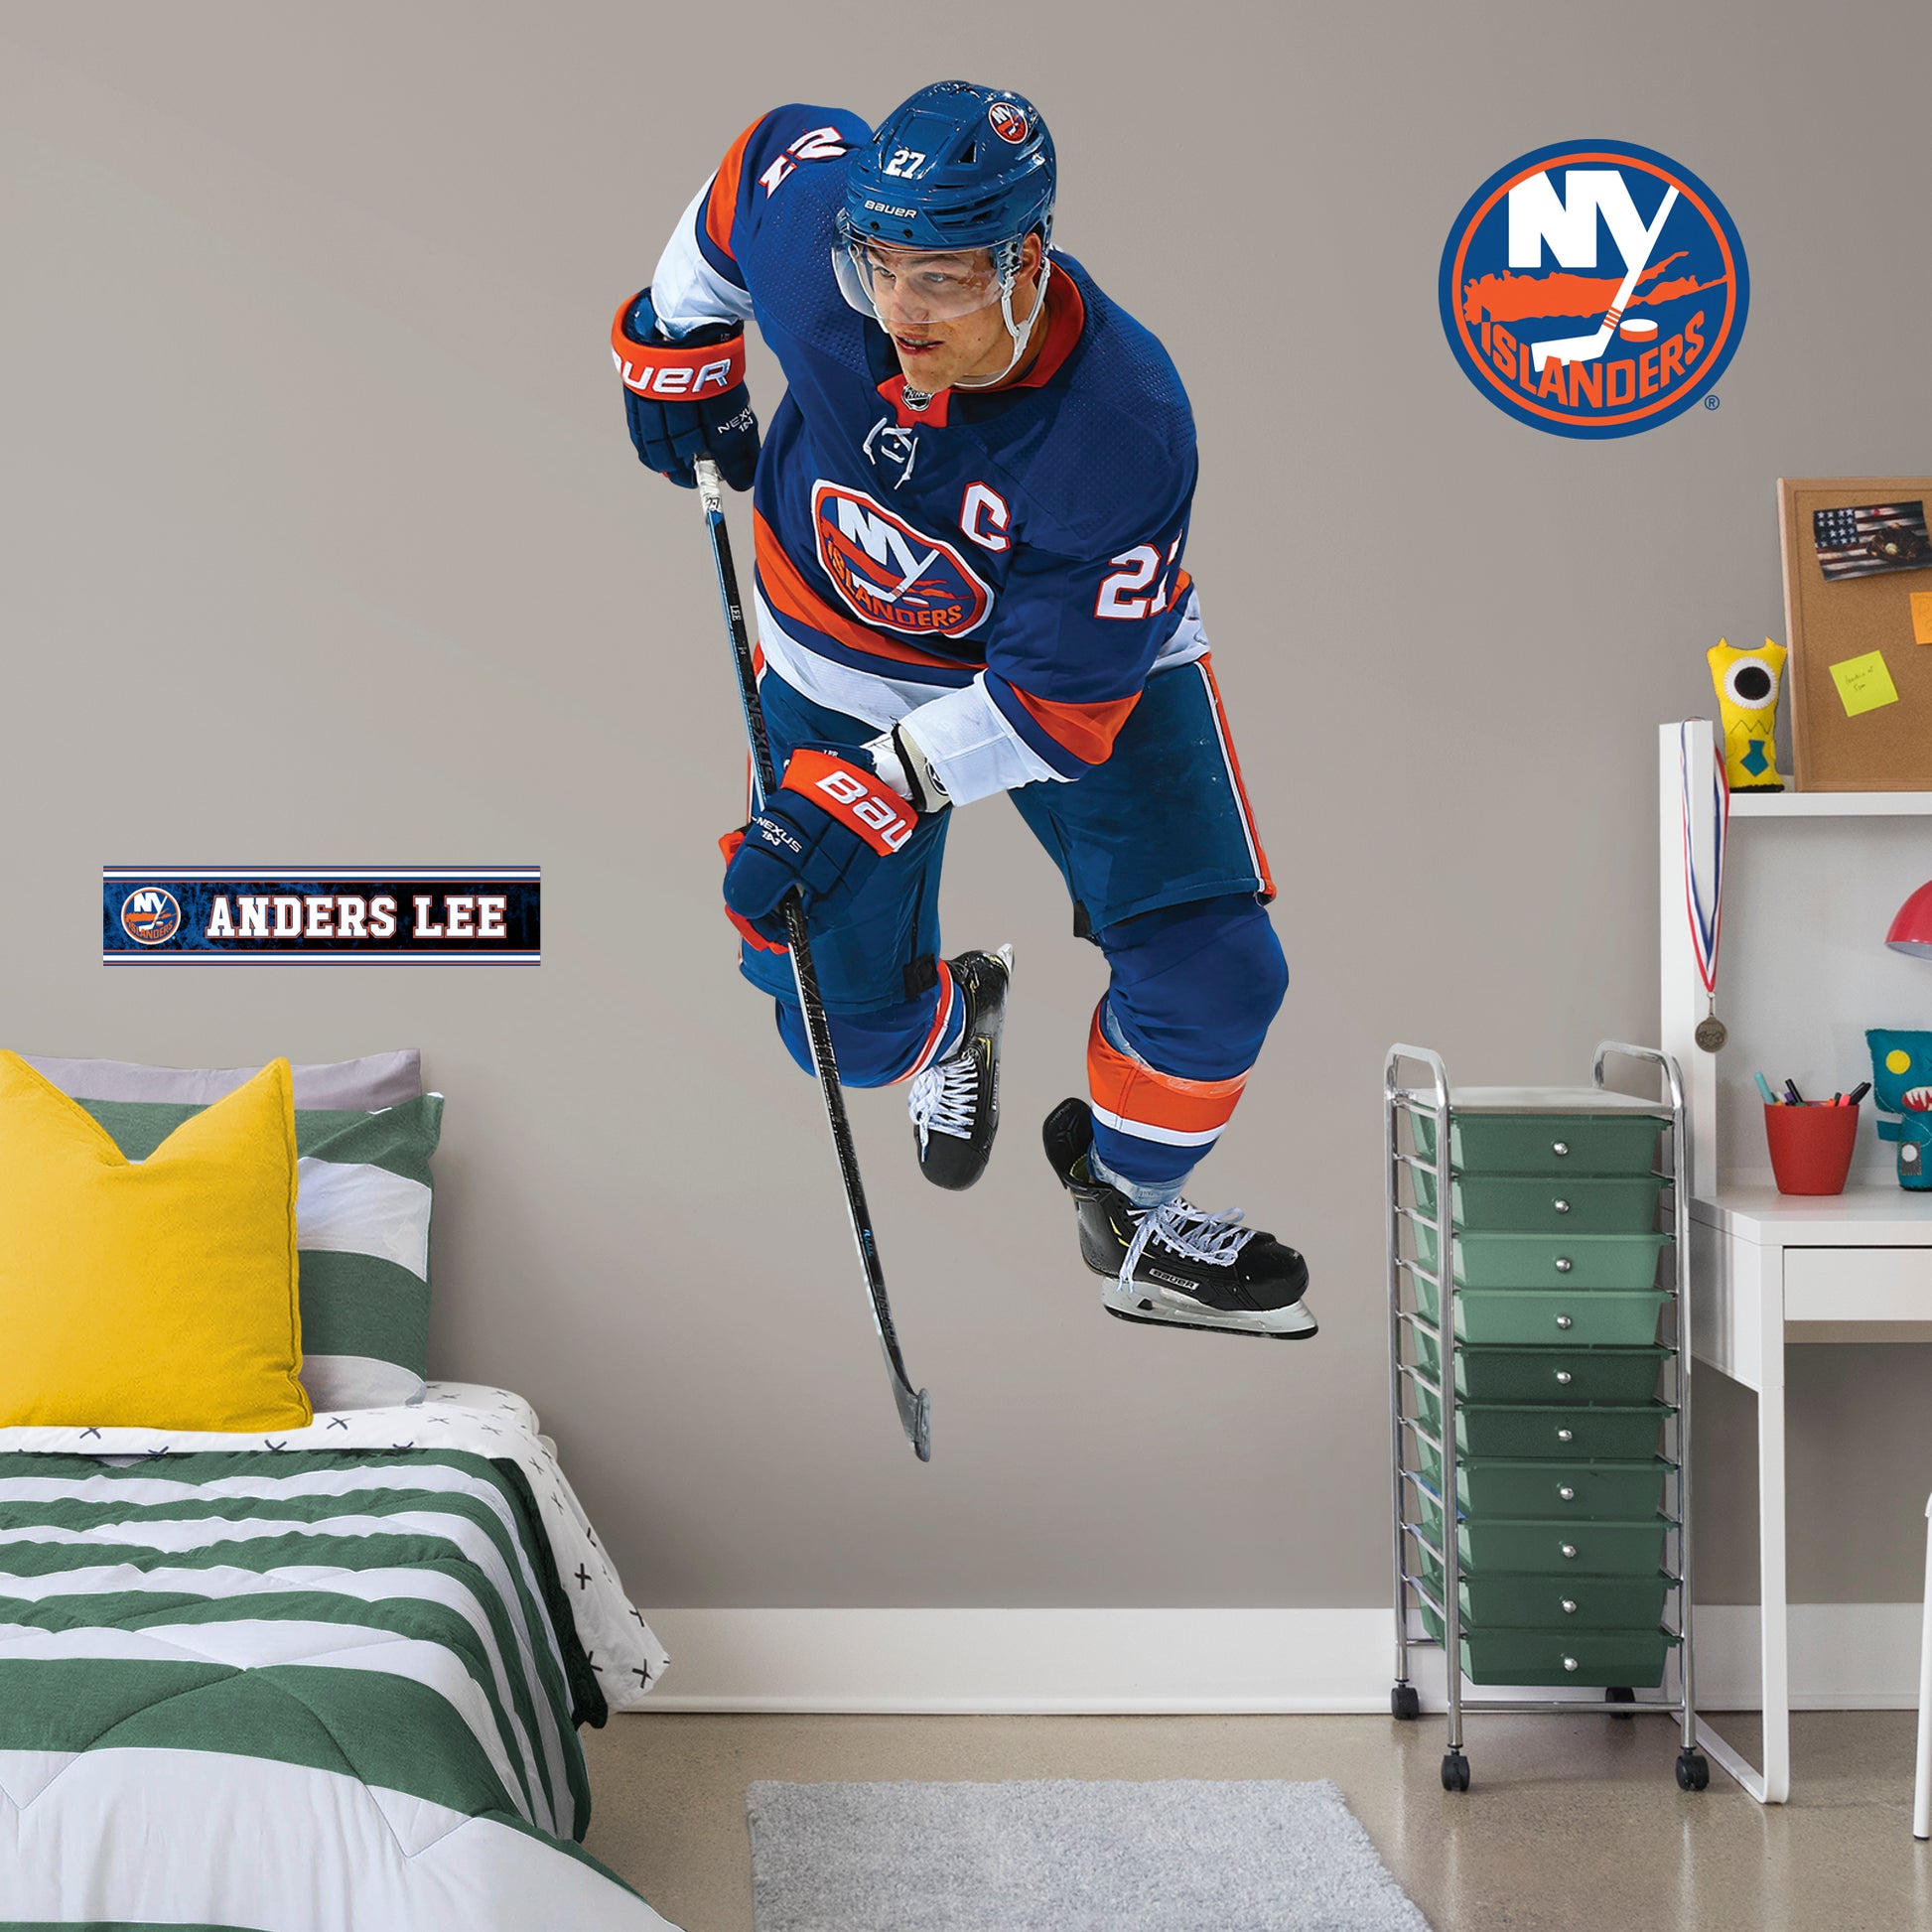 Life-Size Athlete + 2 Decals (39"W x 76"H) NHL fans and Islanders fanatics alike love Anders Lee, the clutch captain from New York, and now you can bring the action to life in your own home! This durable, bold, and removable wall decal set will make the perfect addition to your bedroom, office, or fan room! Let's Go Islanders!